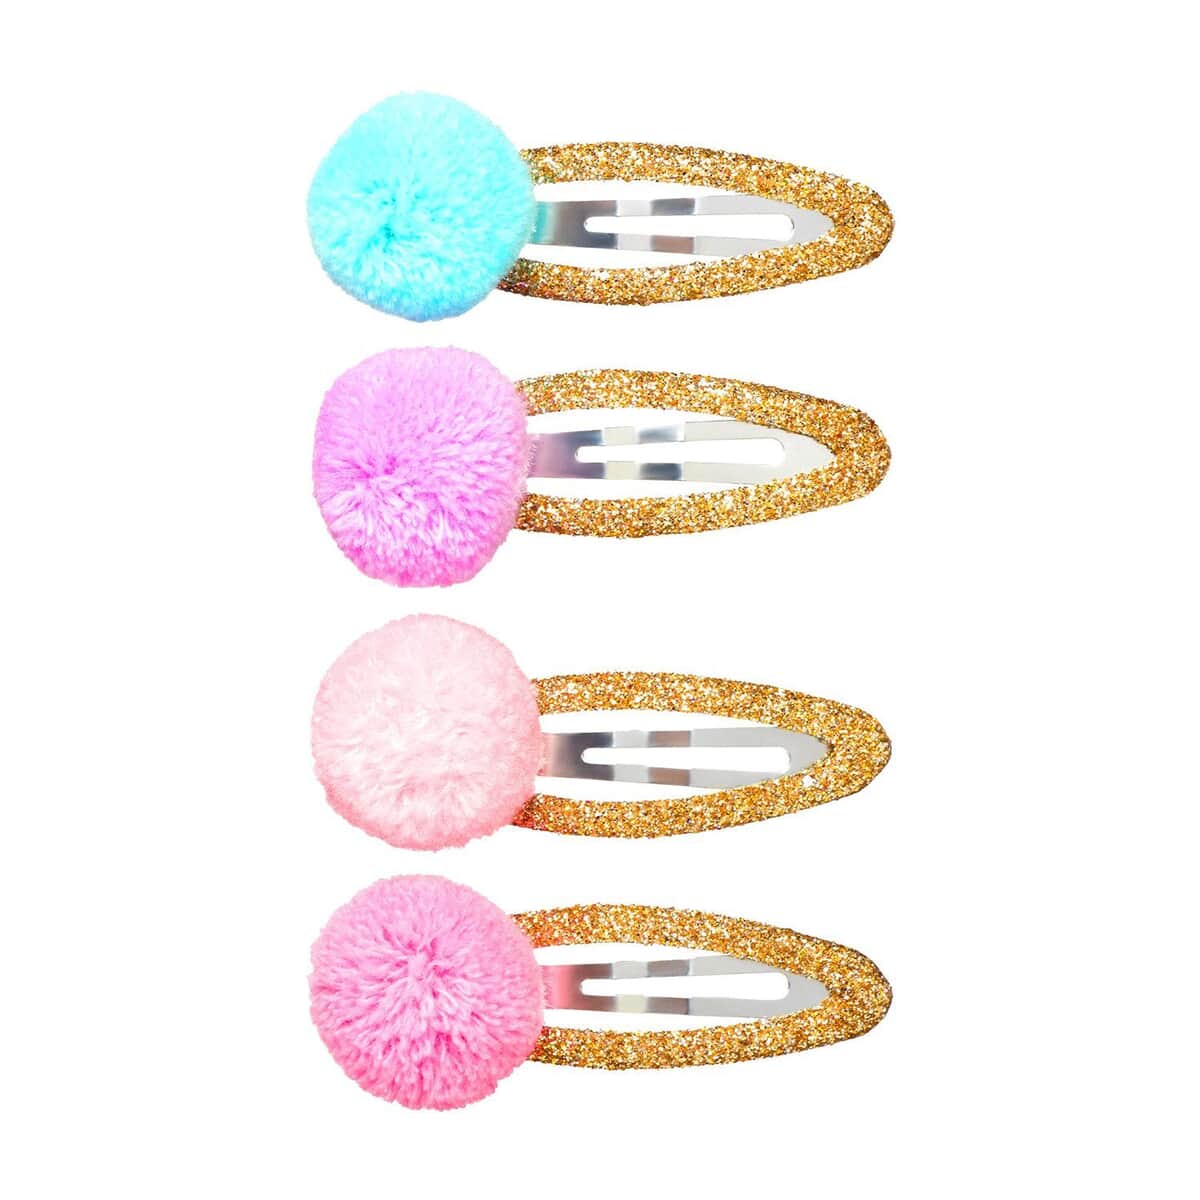 Gold Glitter Hair Clips with Multicolor Pom Pom Accents image number 0